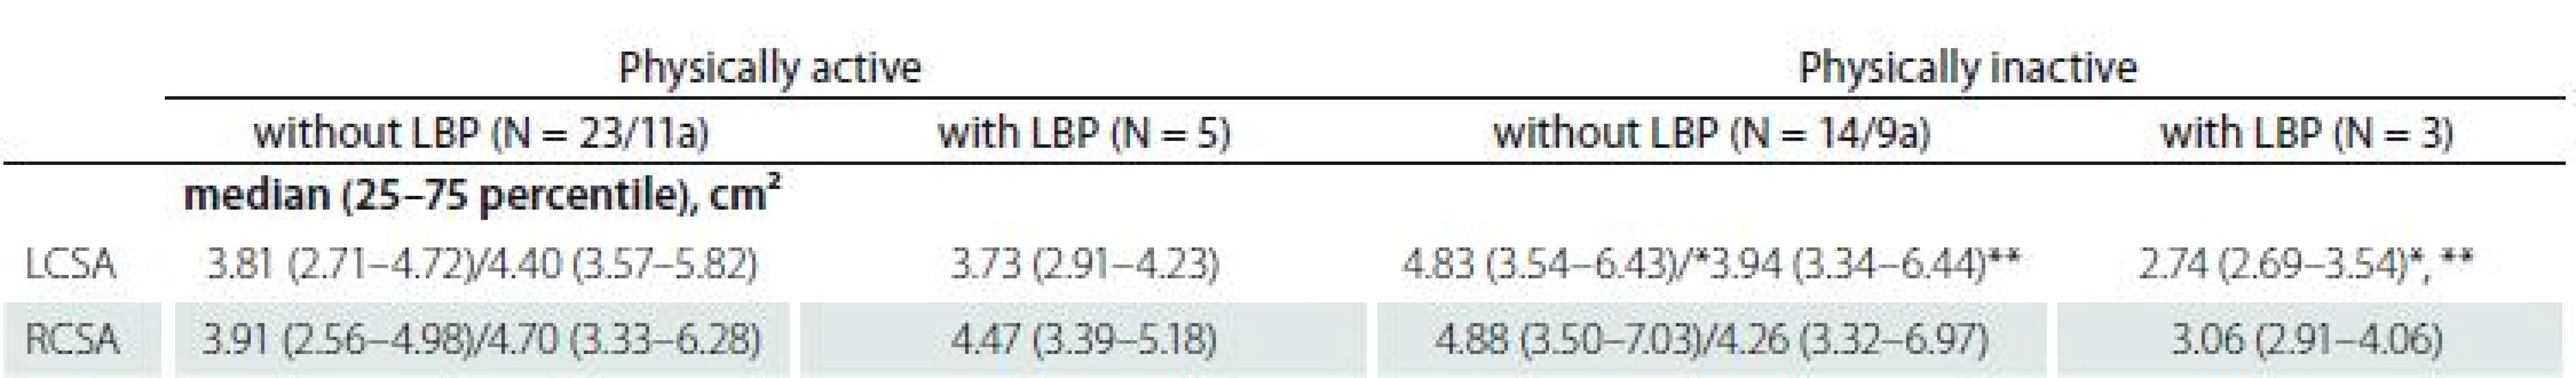 Multifidus muscle size in healthy physically active and physically inactive boys and physically active and physically inactive
boys with low back pain. Since the quantitative variables do not meet the normal distribution conditions, the table shows the median
and 25–75 percentile.